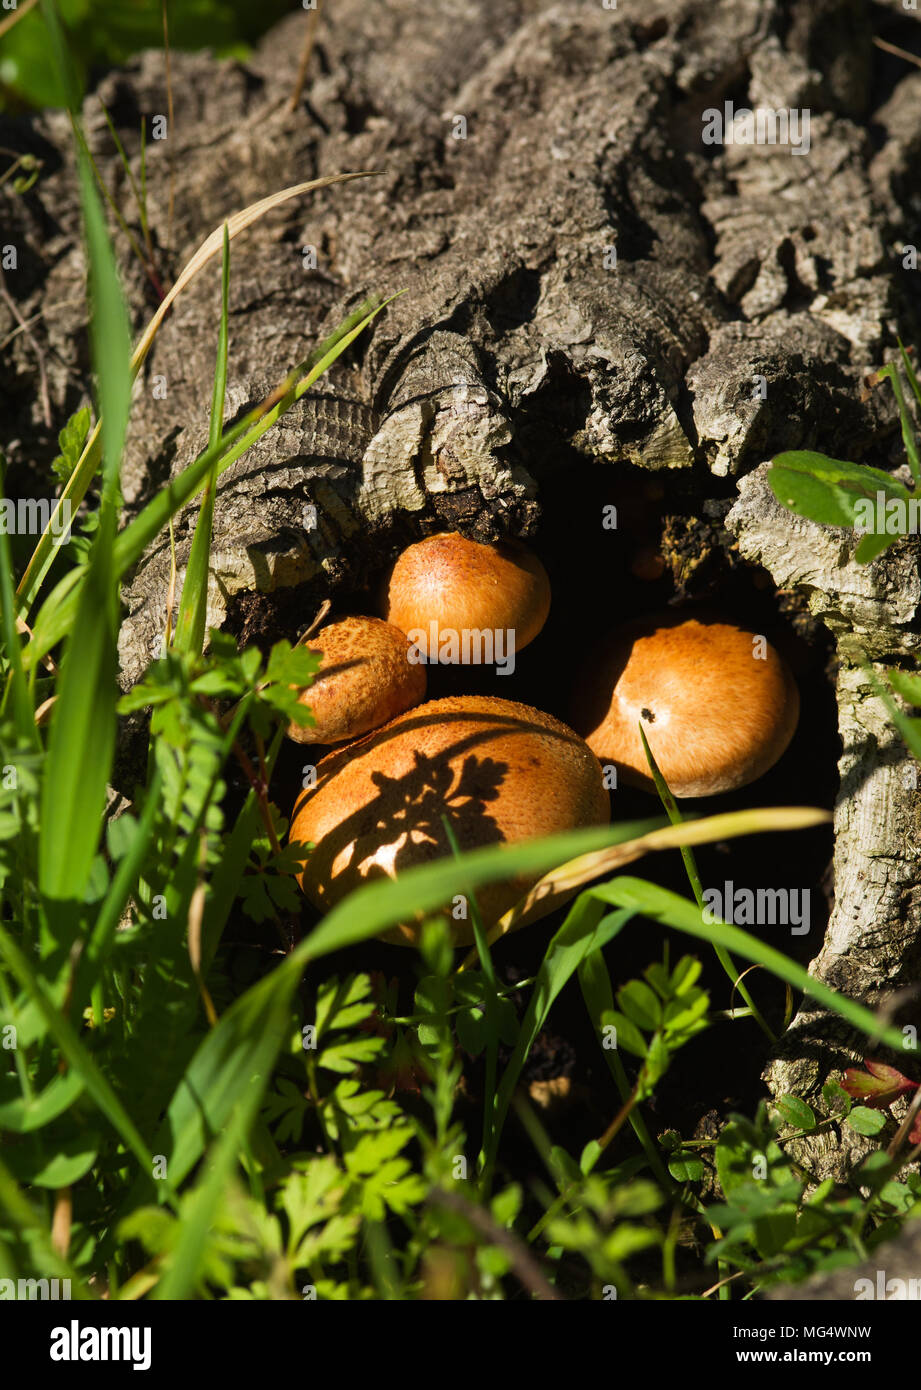 Rounded golden mushrooms (Gymnopilus suberis) growing inside of a dead cork tree log fallen into a green weeds field. Arrabida mountains, Portugal. Stock Photo